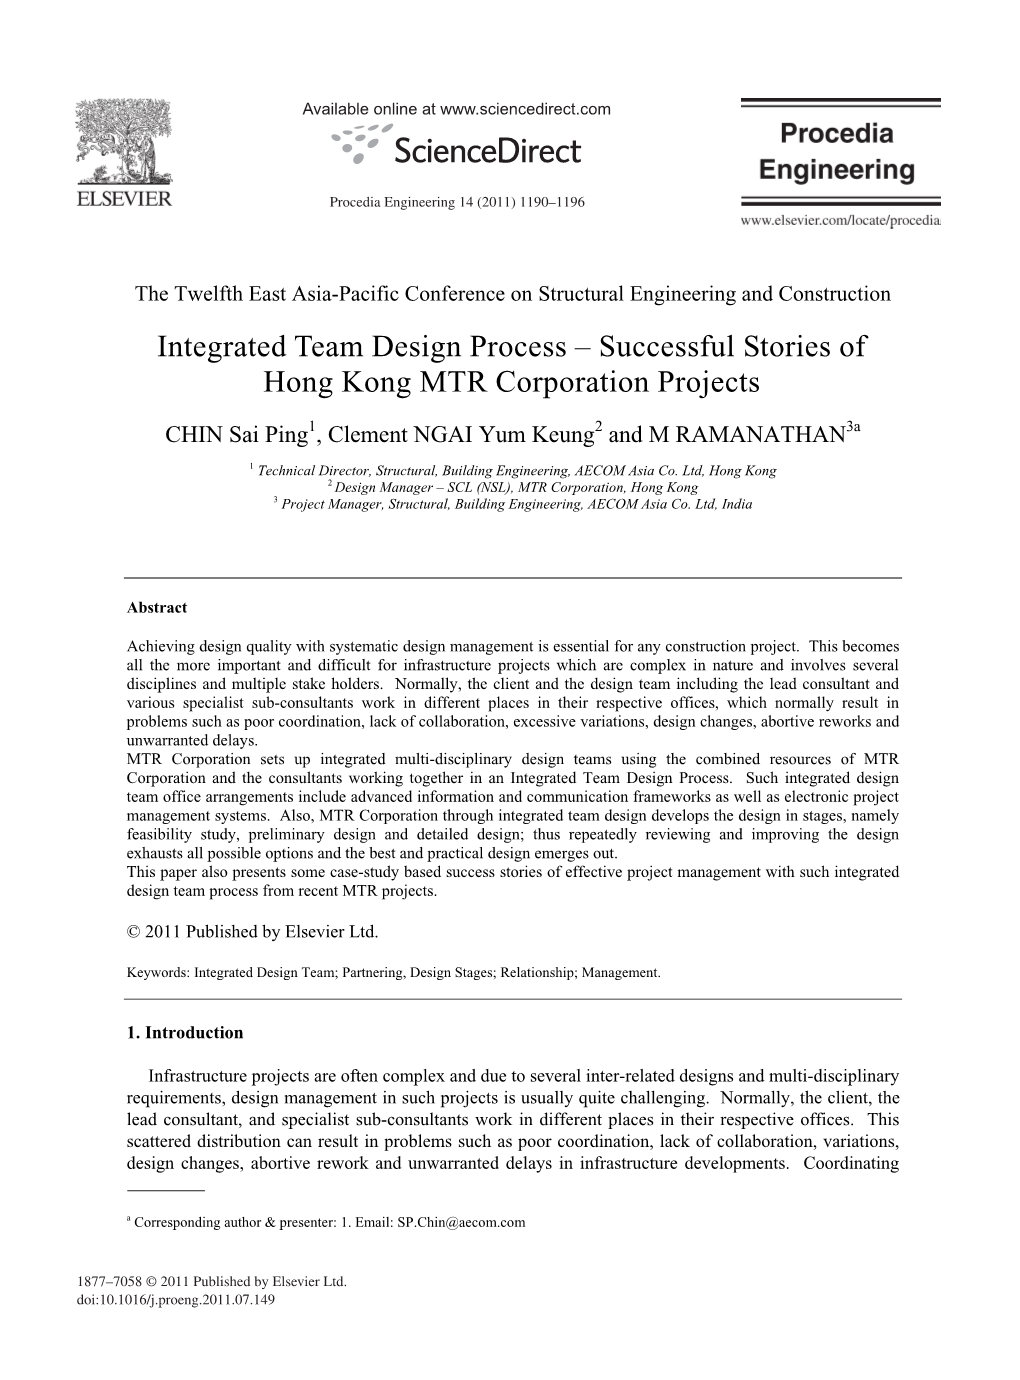 Successful Stories of Hong Kong MTR Corporation Projects